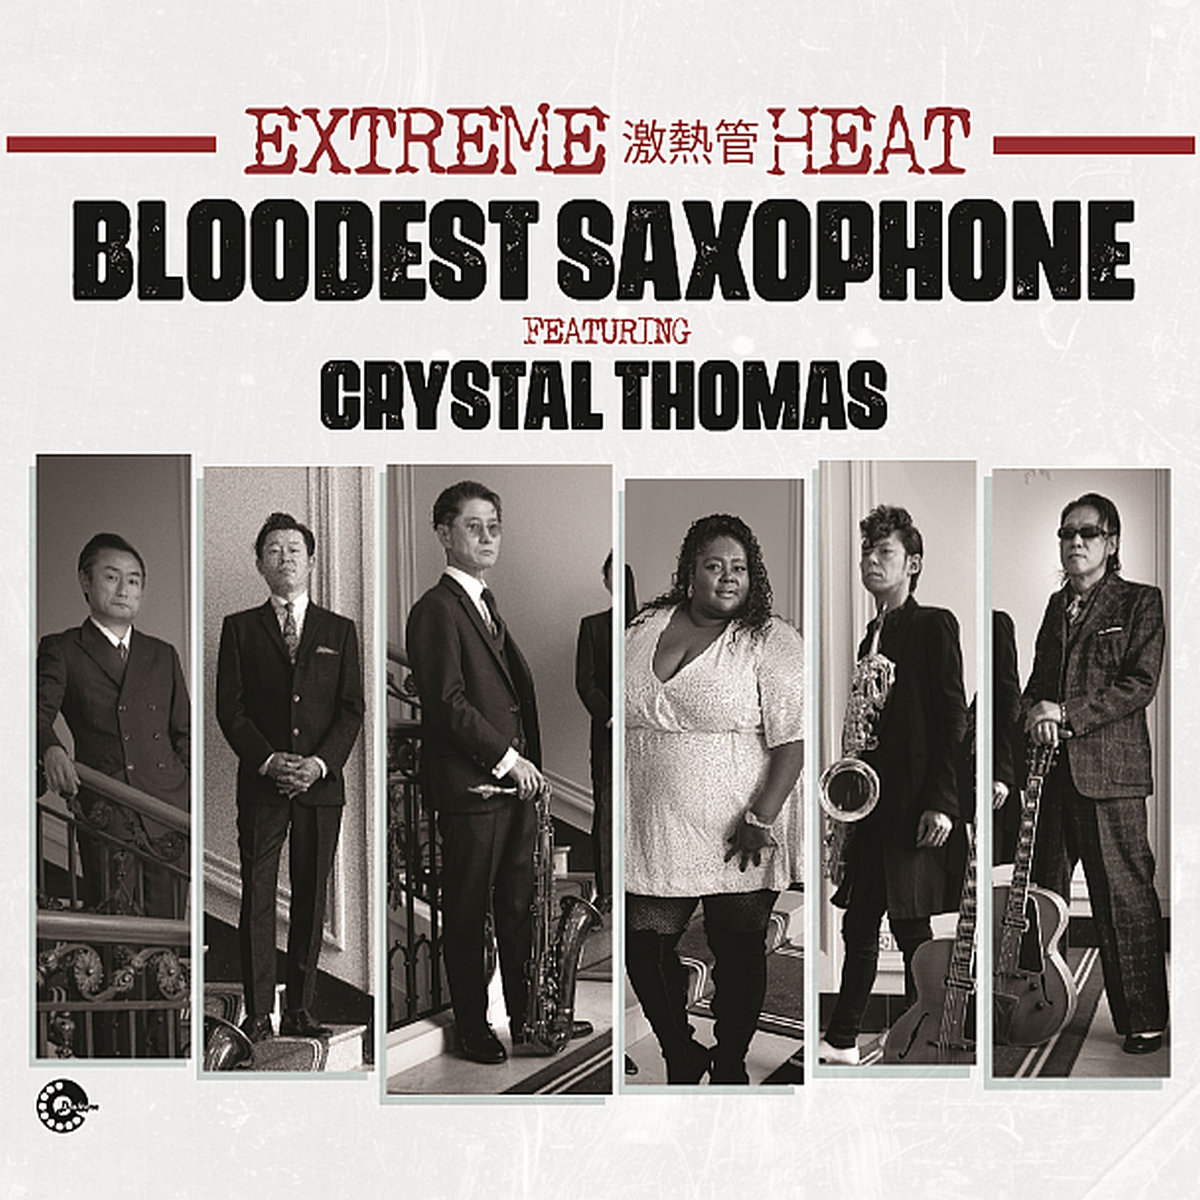 Bloodest Saxophone Featuring Crystal Thomas - Extreme Heat